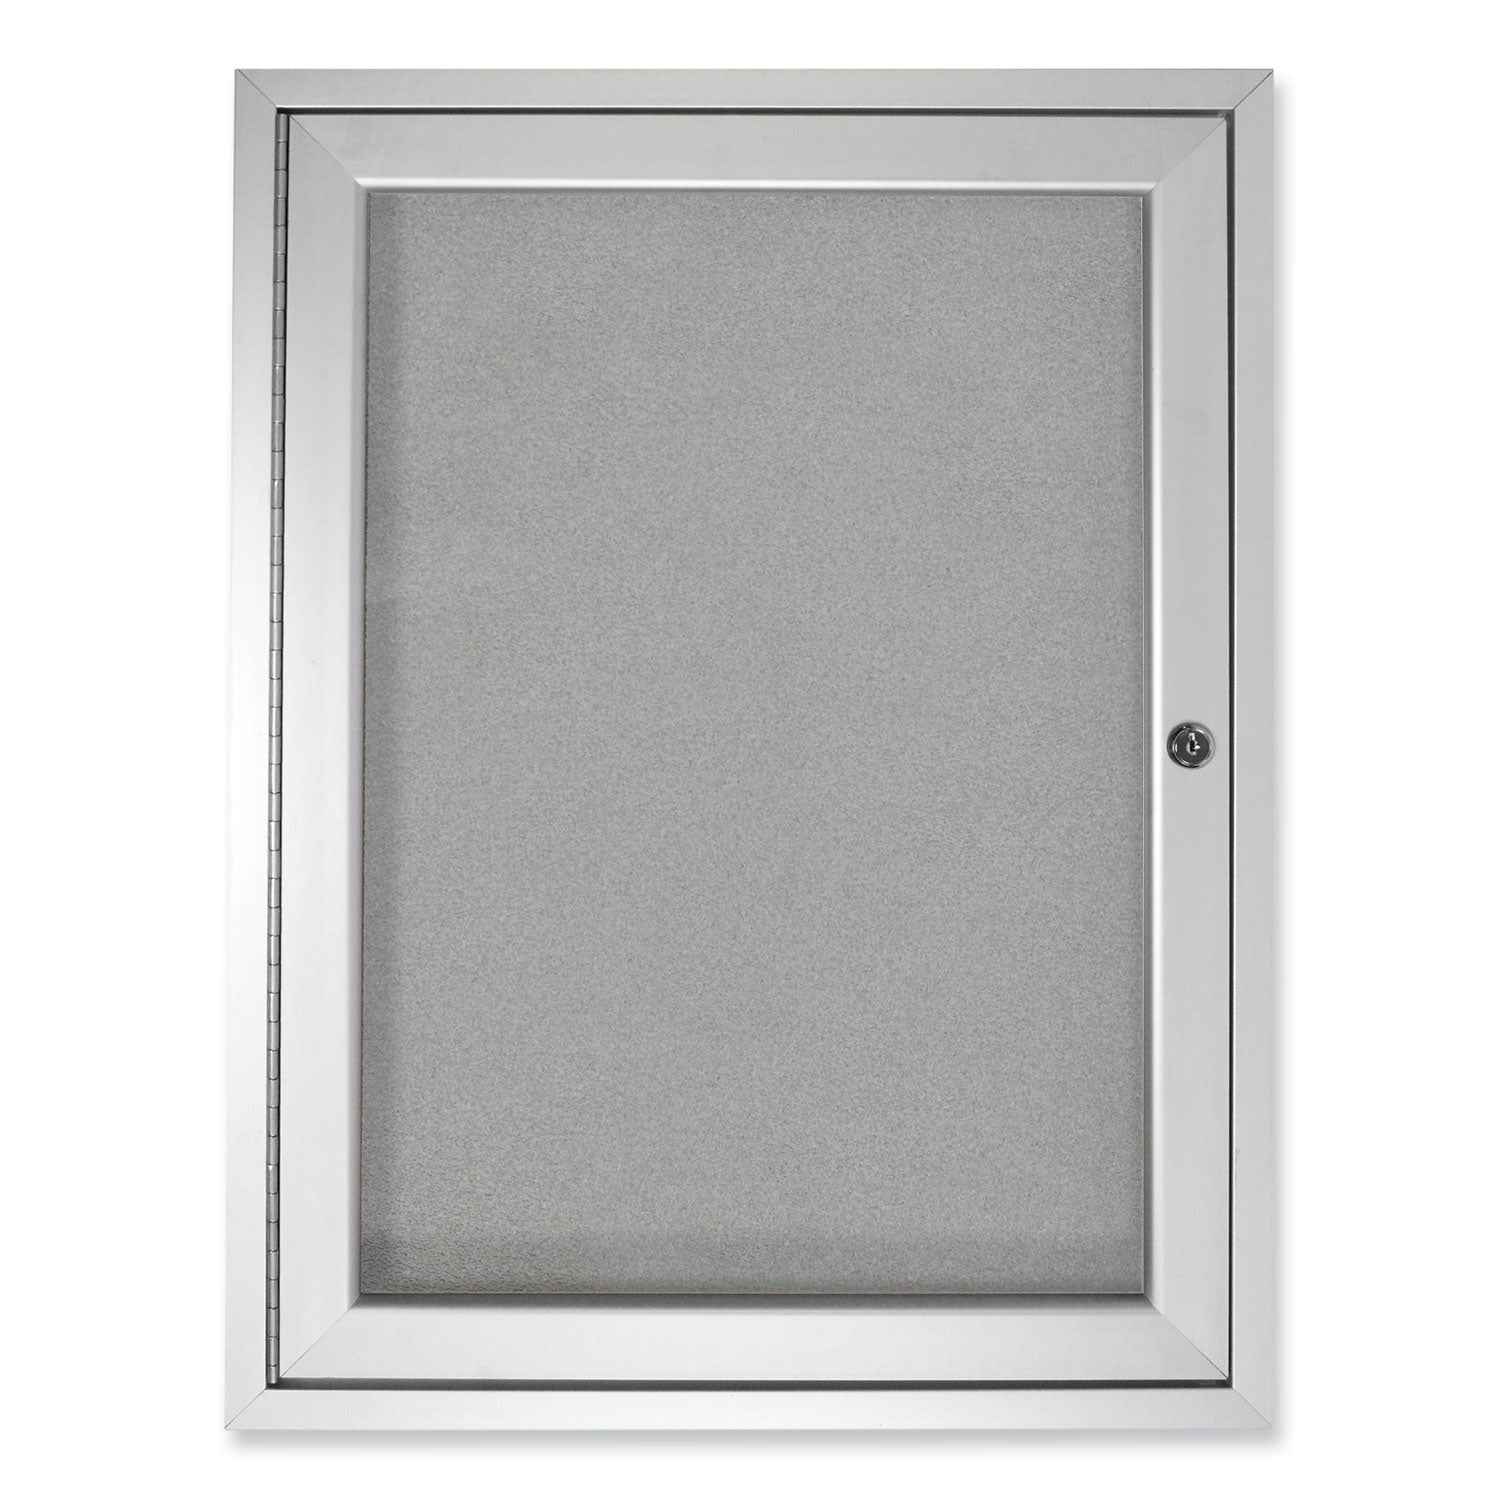 1-door-enclosed-vinyl-bulletin-board-with-satin-aluminum-frame-24-x-36-silver-surface-ships-in-7-10-business-days_ghepa13624vx193 - 1